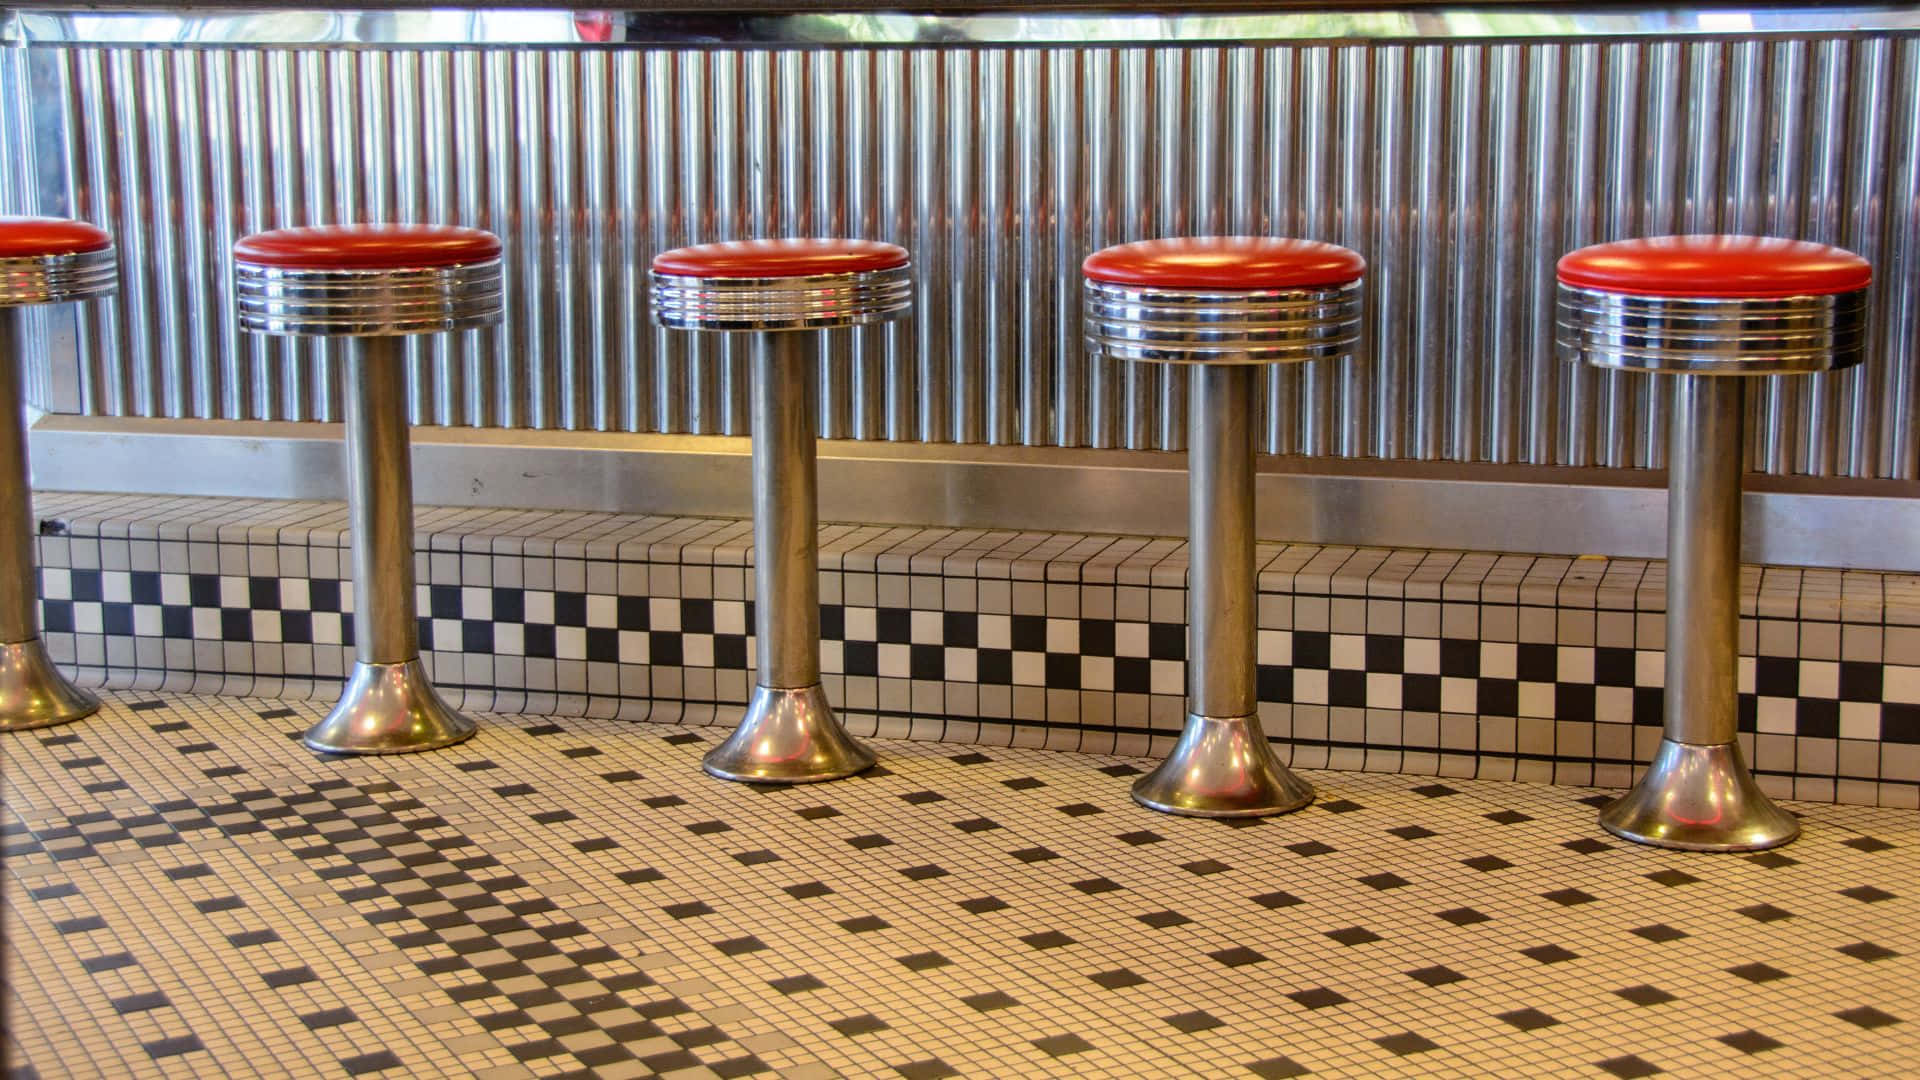 Retro Diner Scene with Red Booths and Jukebox